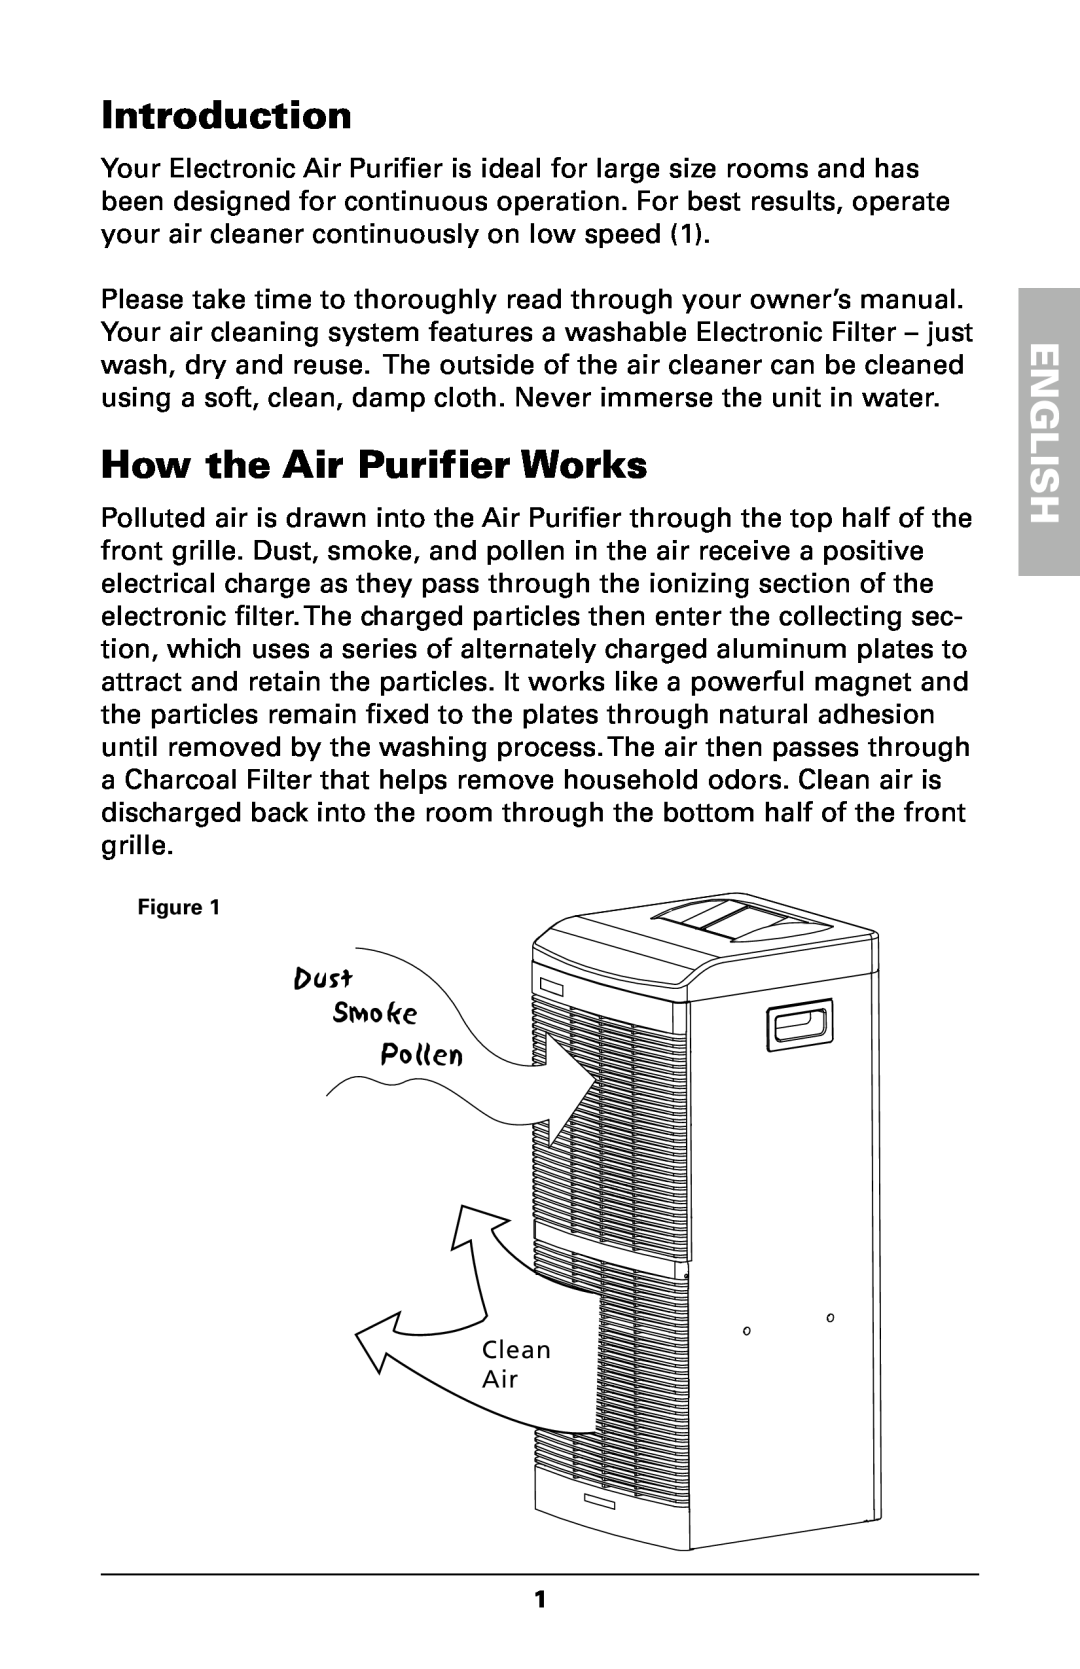 Trion High Efficiency Console Electronic Air Purifier manual Introduction, How the Air Purifier Works, English 